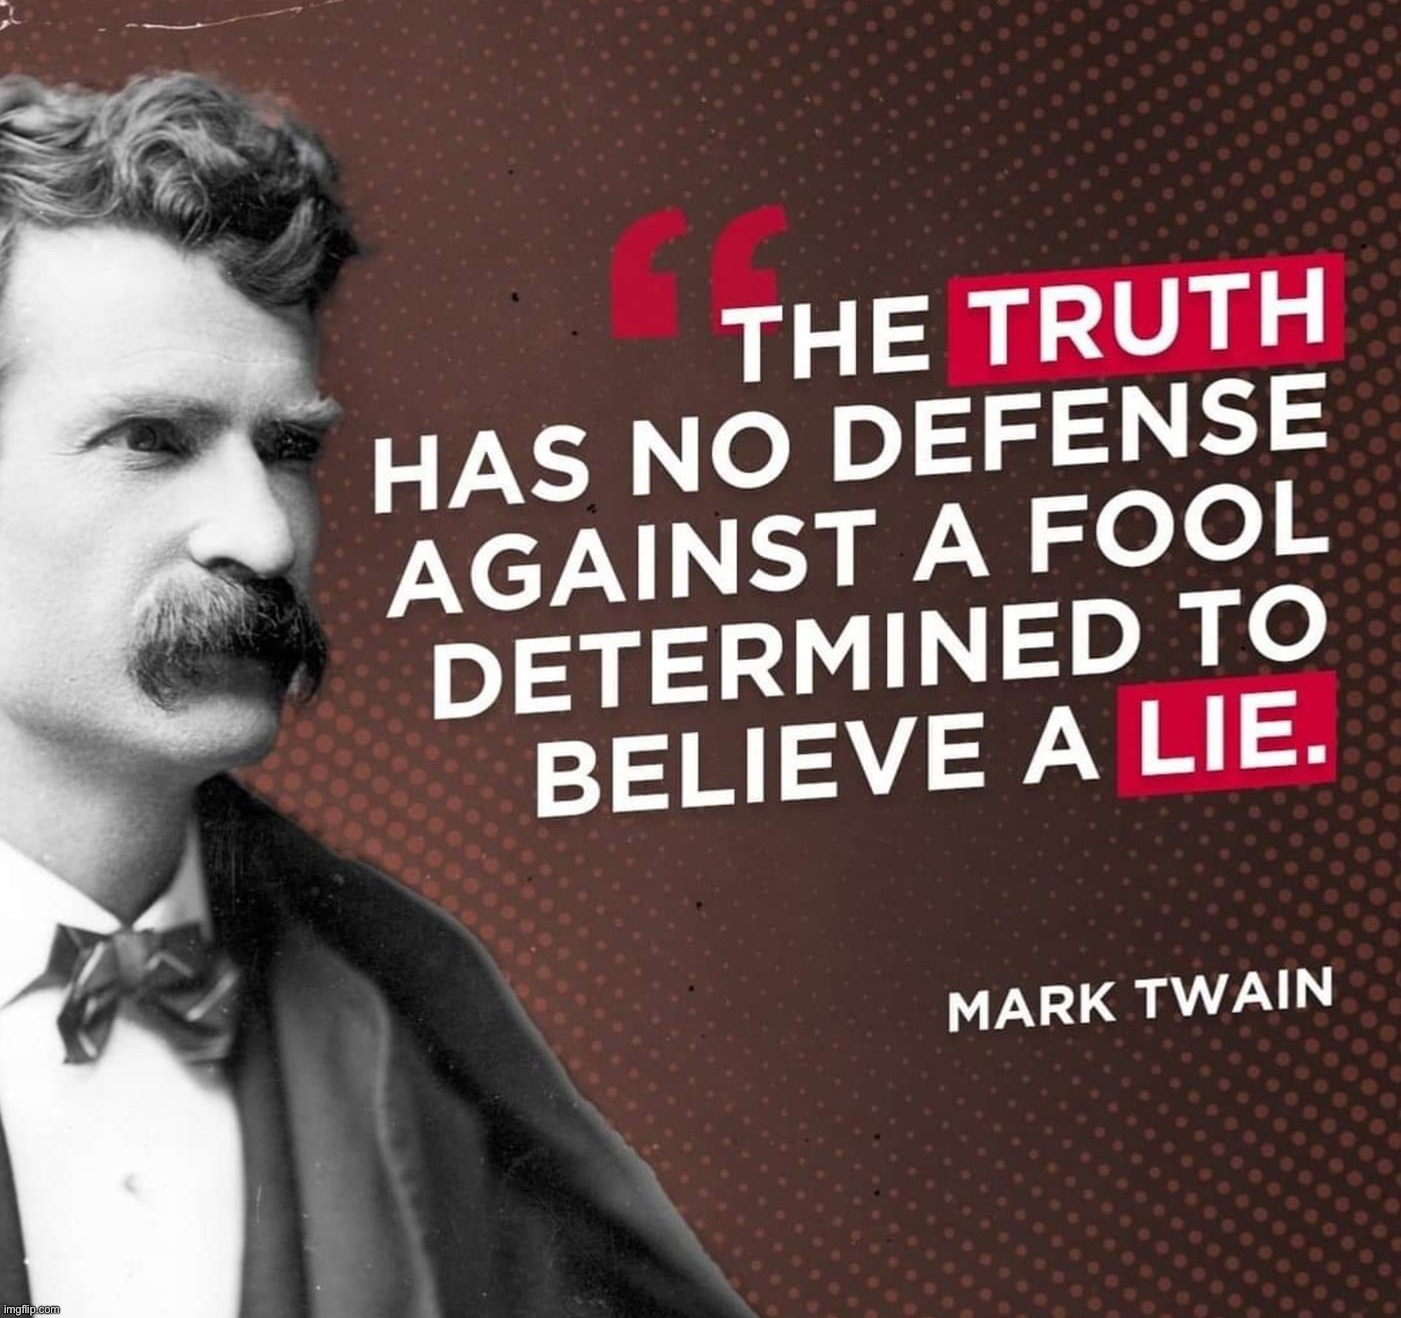 Mark Twain quote | image tagged in mark twain quote | made w/ Imgflip meme maker